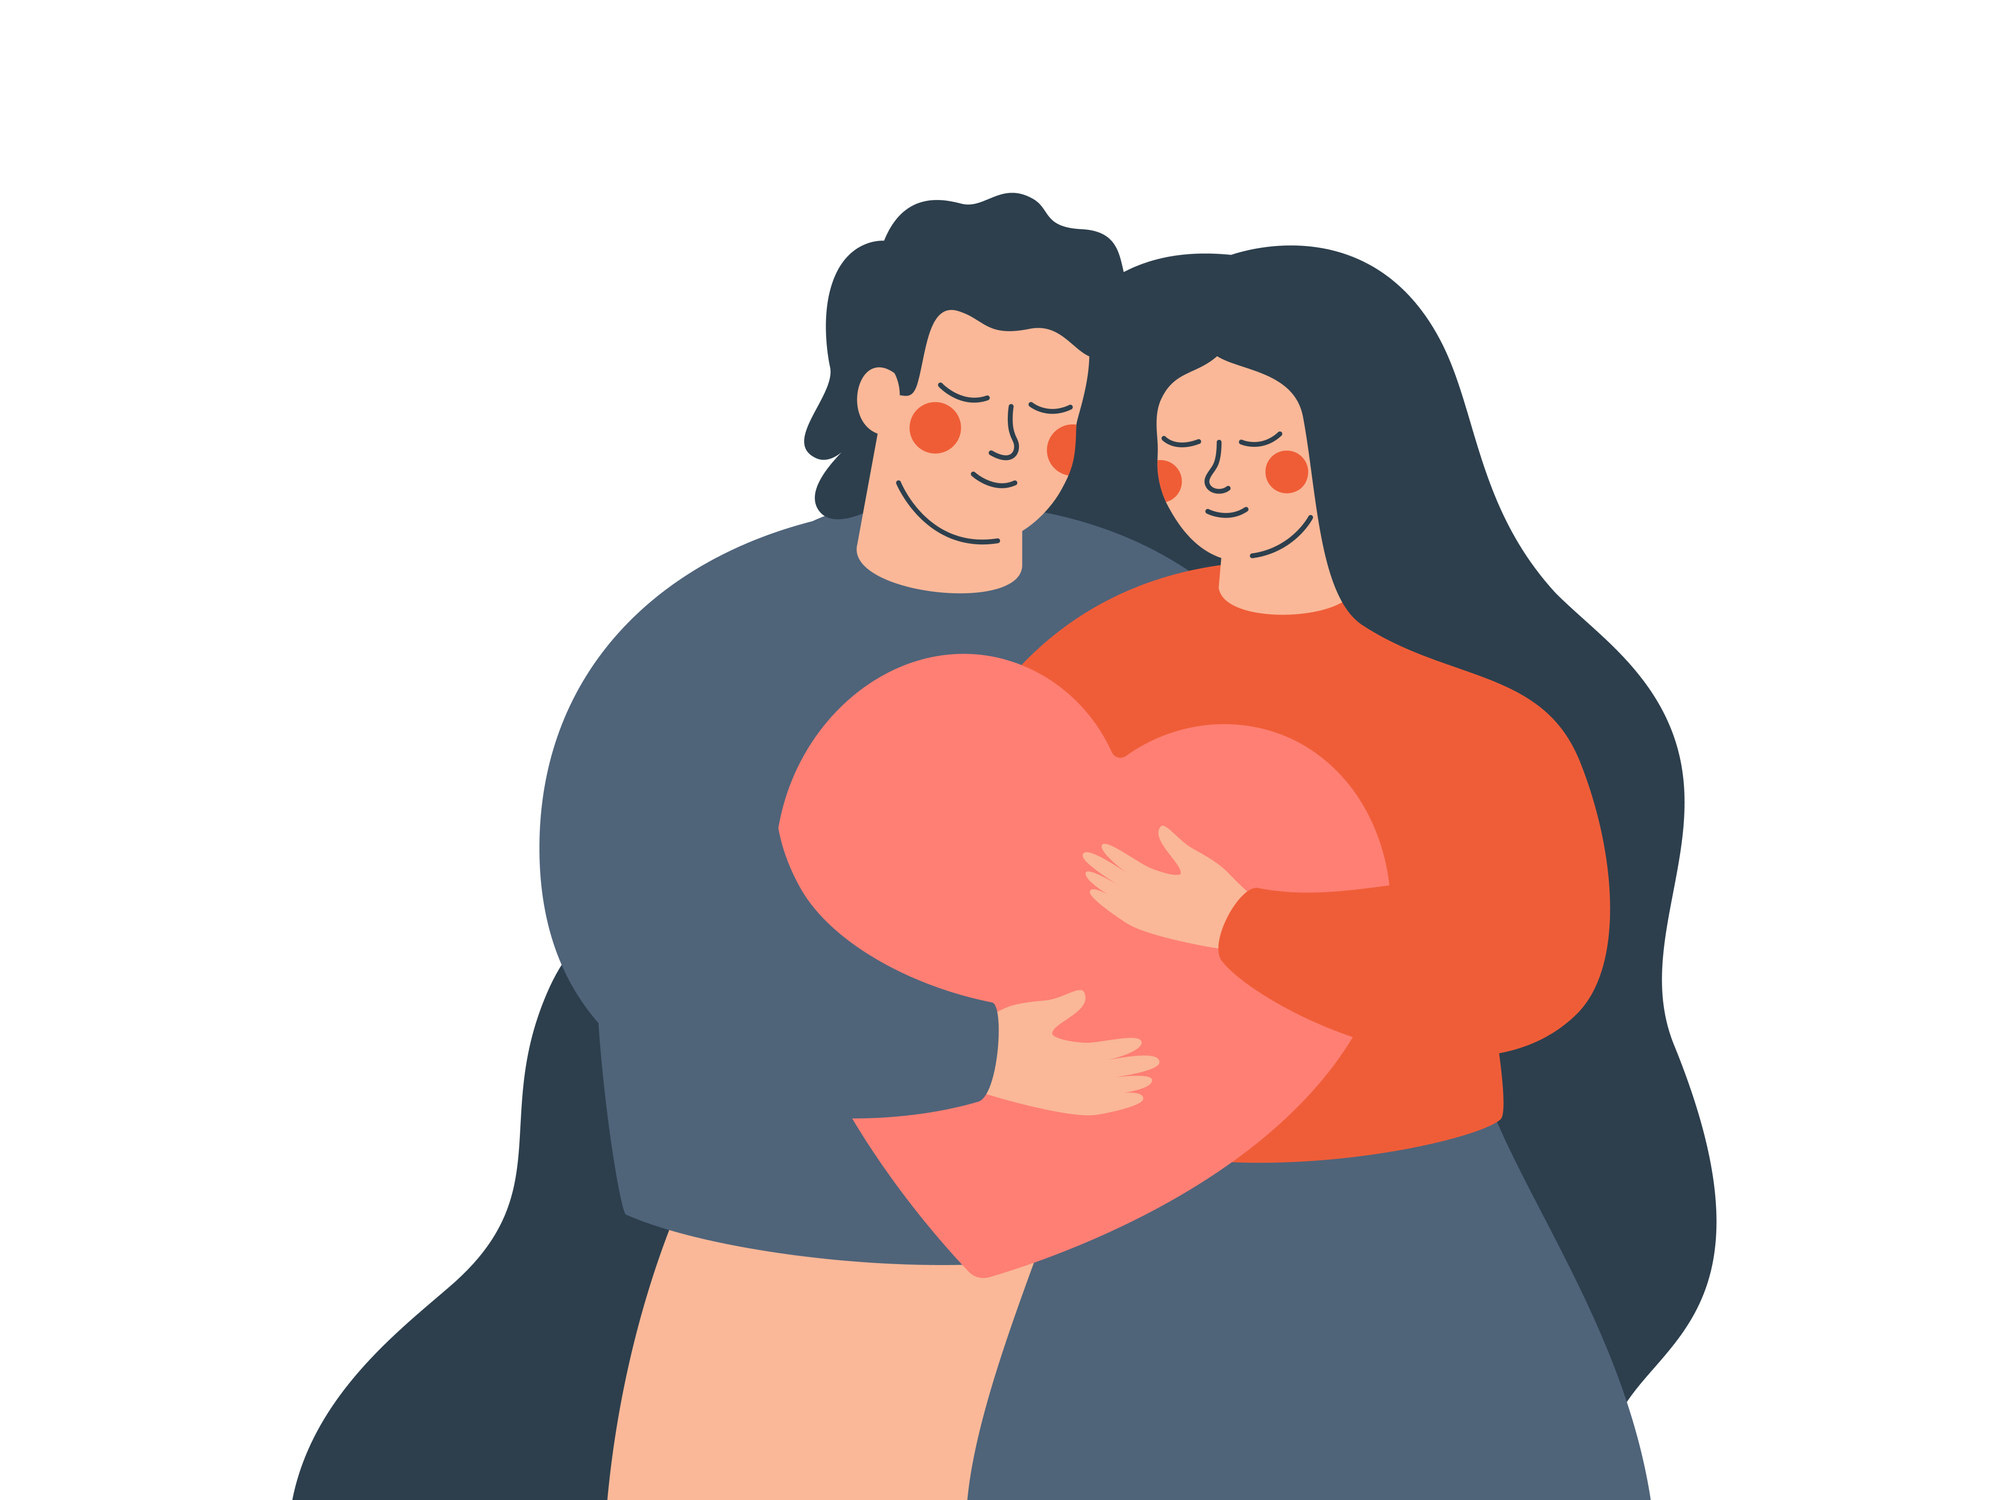 Illustration of a man and a woman holding a heart together